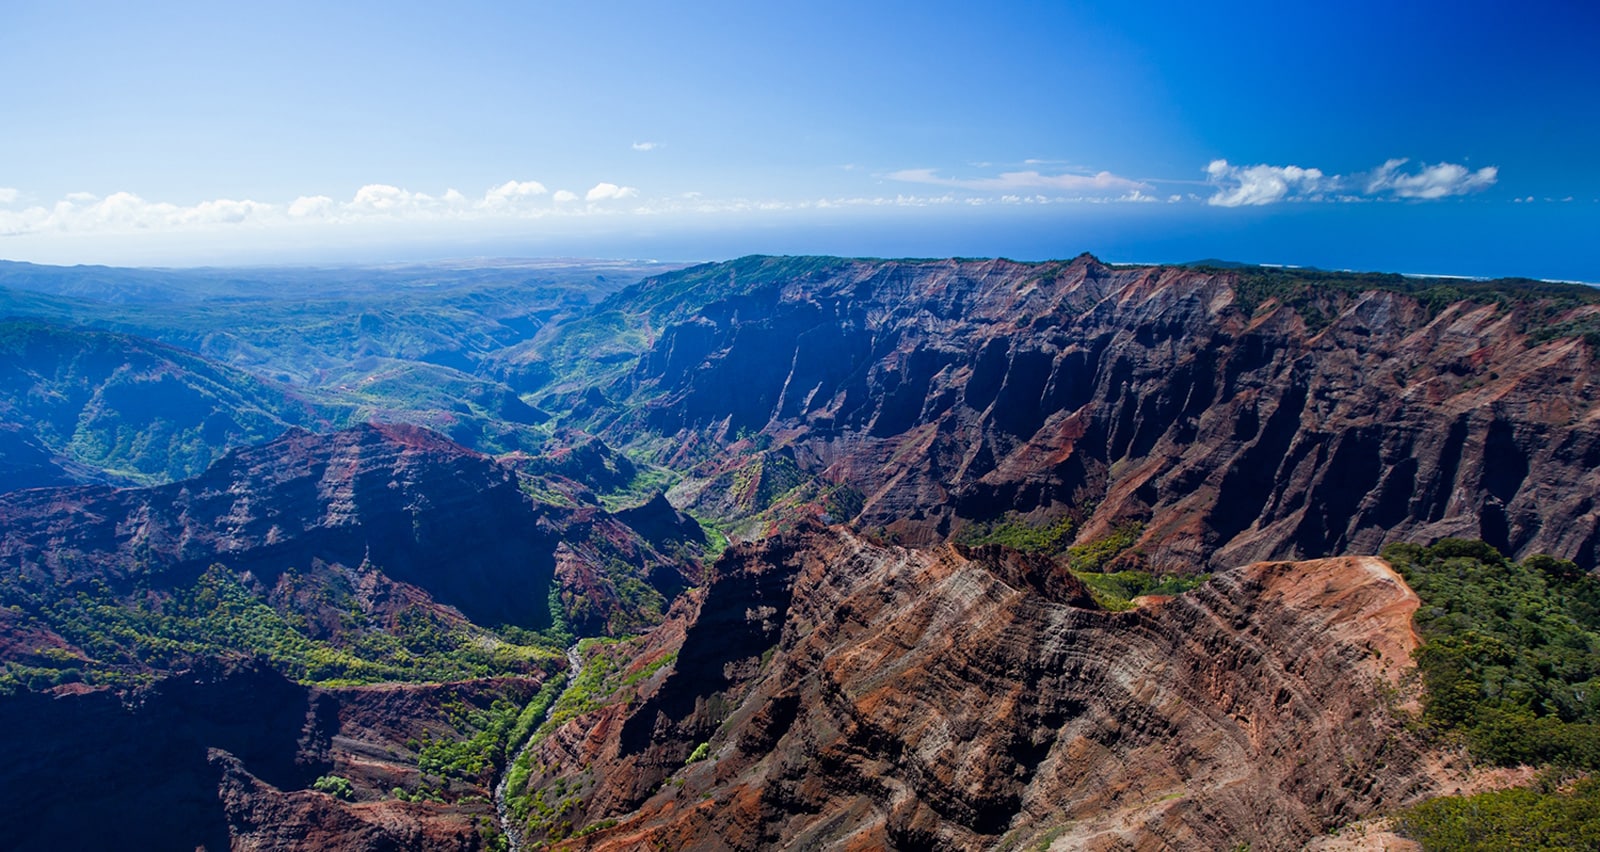 A sweeping panoramic view of rugged canyons and lush green valleys